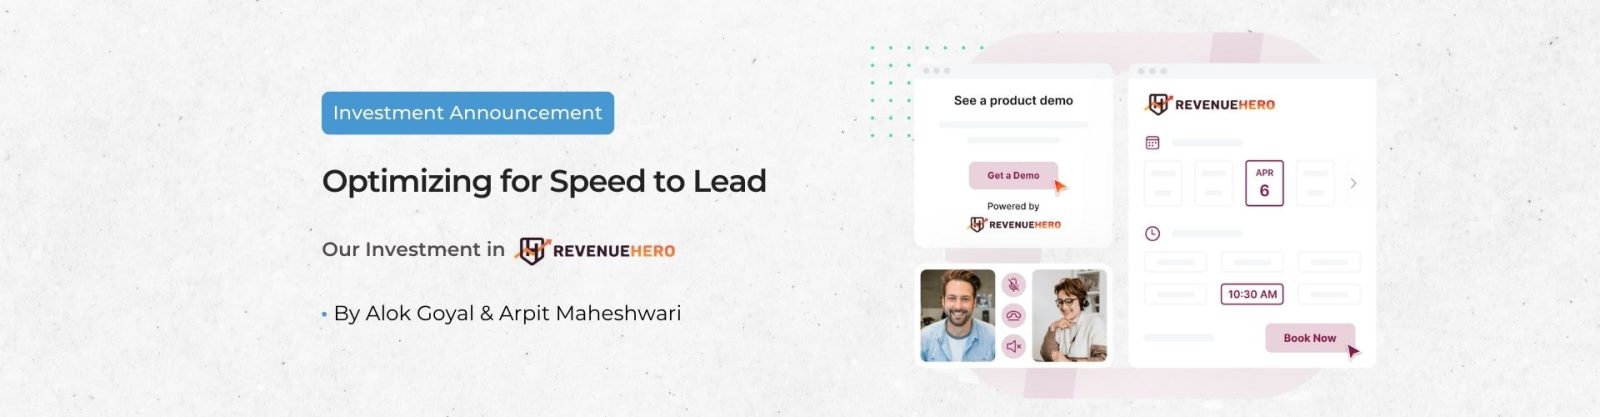 Optimizing for speed to lead, why we invested in RevenueHero